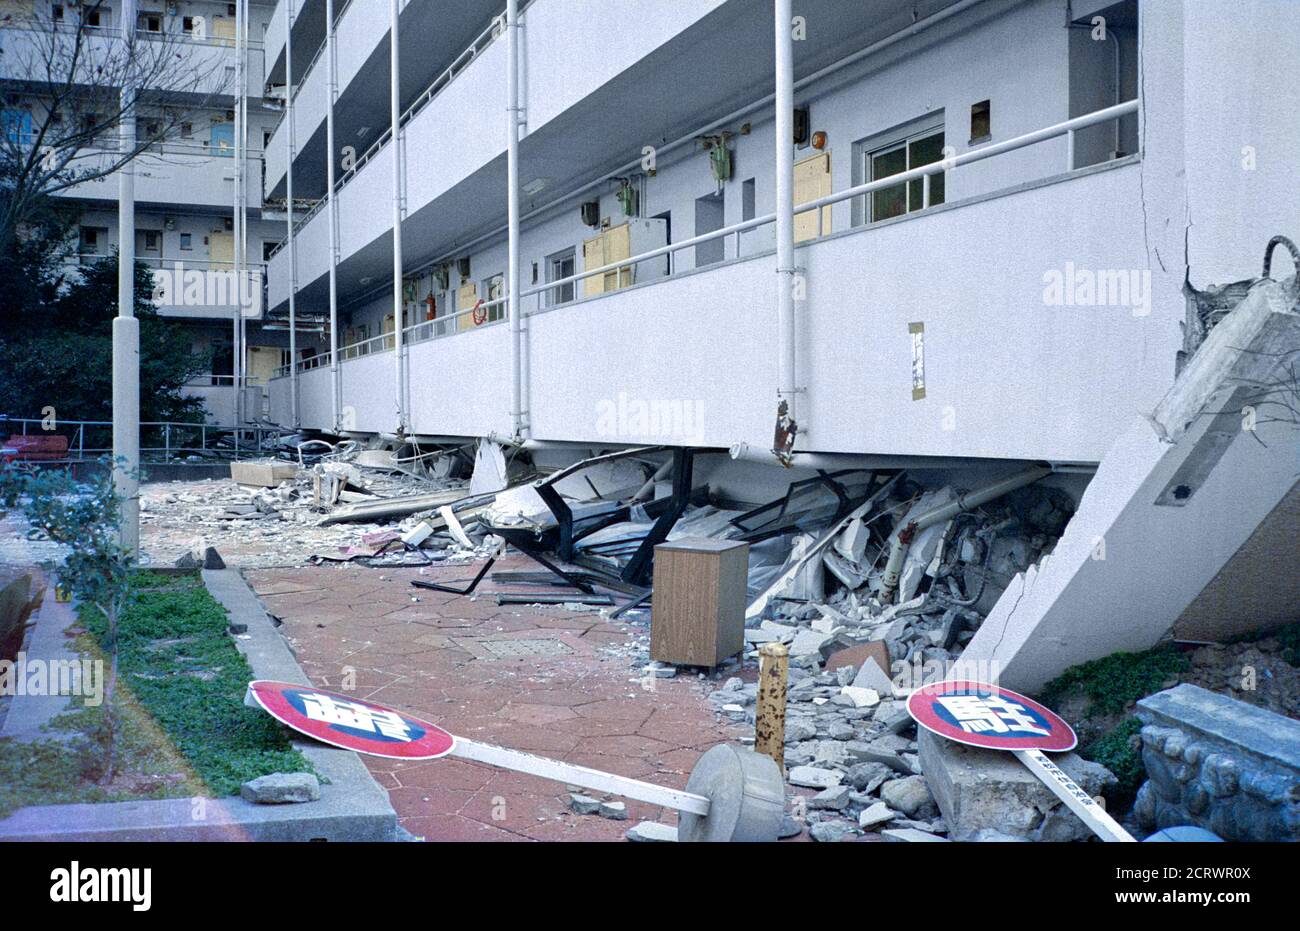 Collapsed apartment complex resulting from the damage caused by the 1995 Great Hanshin Earthquake in Kobe, Japan Stock Photo